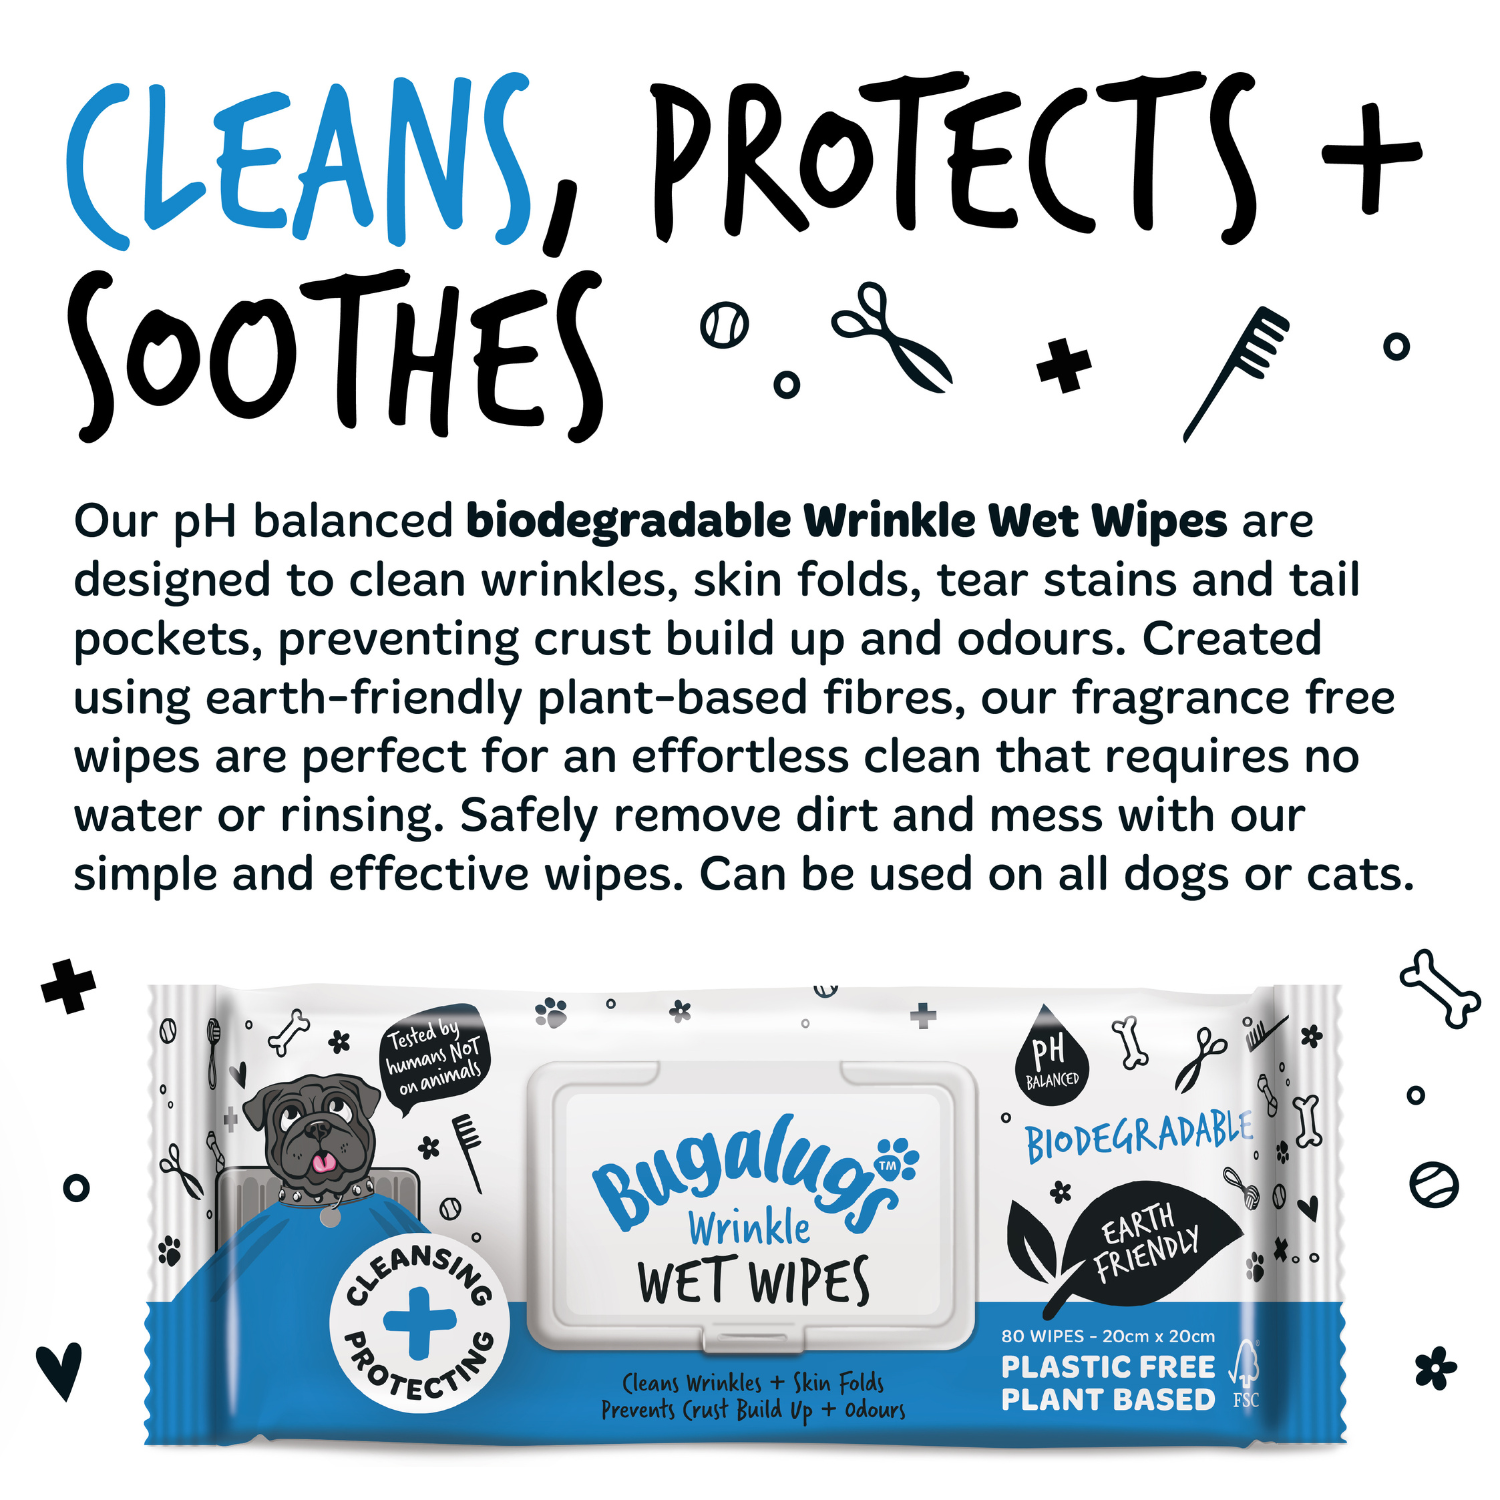 Bugalugs Wrinkle Wet Wipes for Dogs and Cats - Cleans, protects and soothes